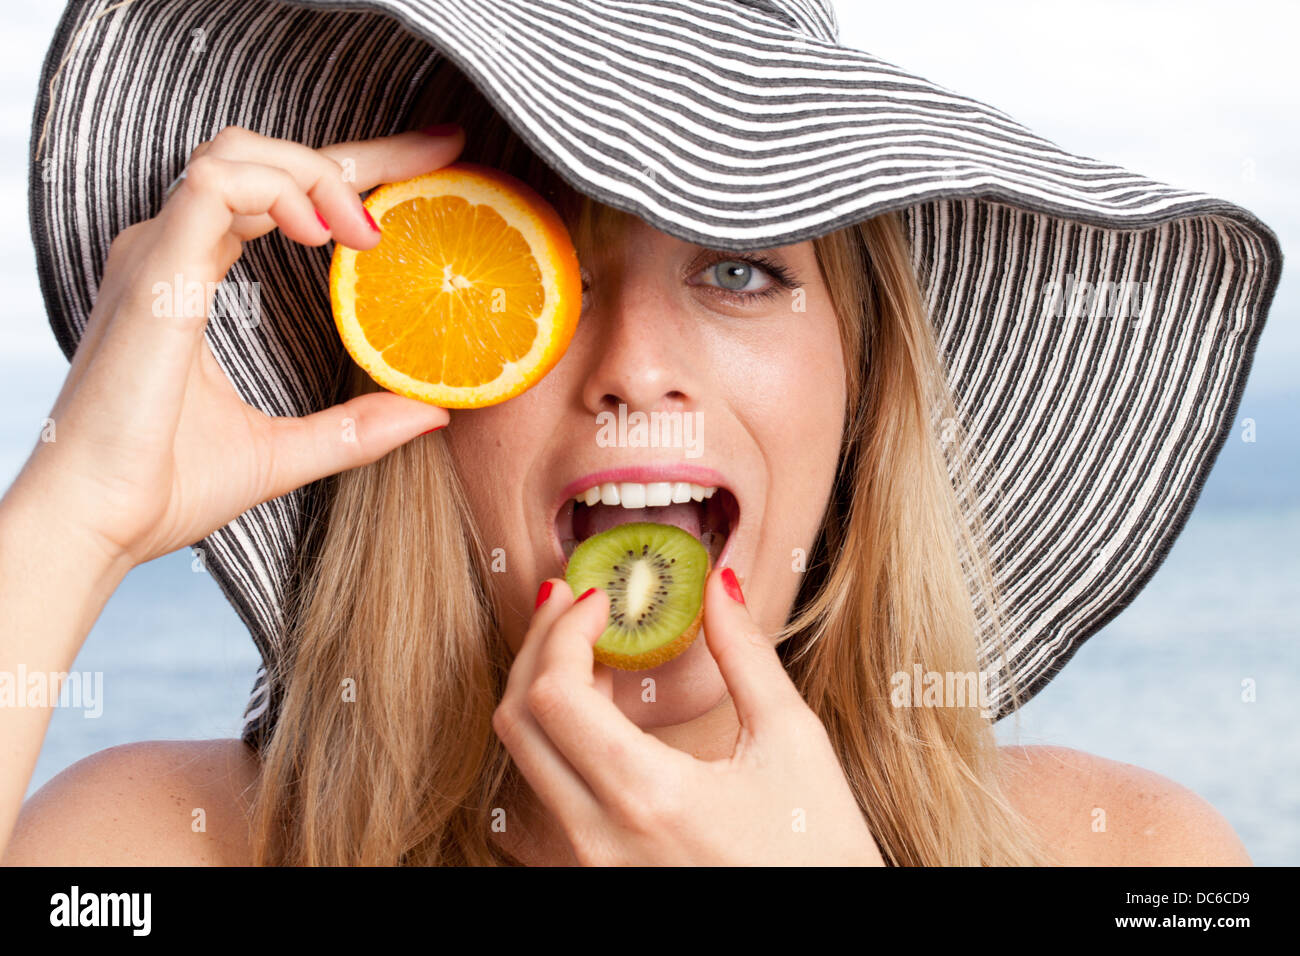 A woman covers one eye with an orange slice while taking a bite of kiwi. Stock Photo